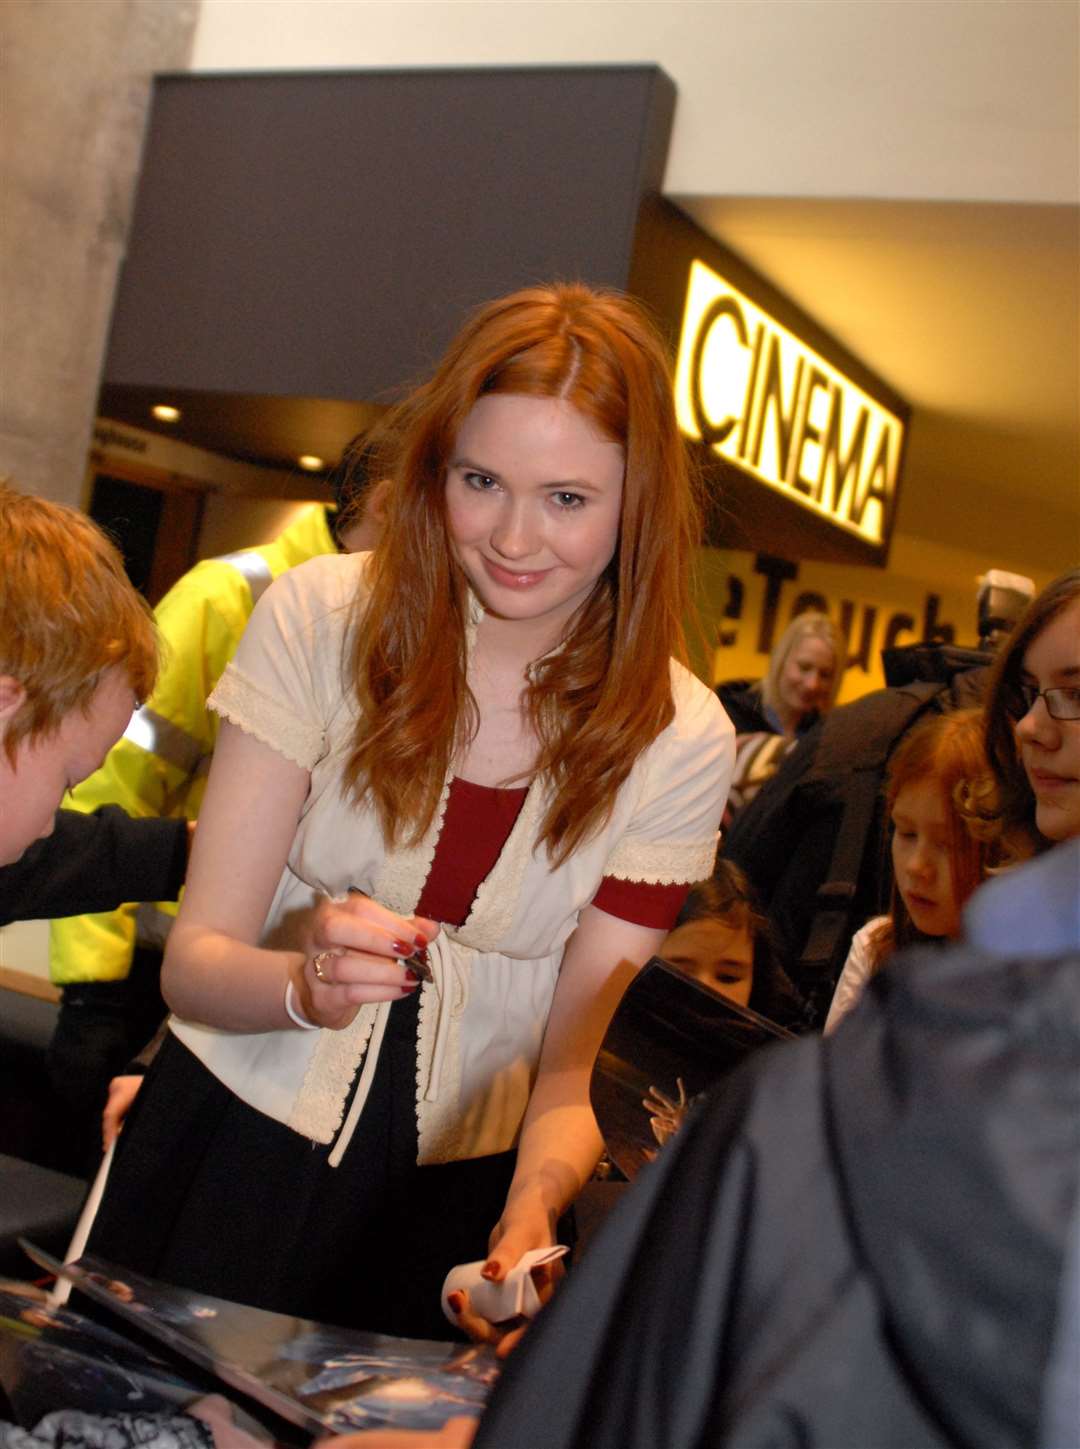 Karen Gillan – who had been taught by Amanda Luscombe-Smith – returning to Eden Court for the screening of the first episode of Doctor Who with her big role as Amy Pond. Picture: HNM